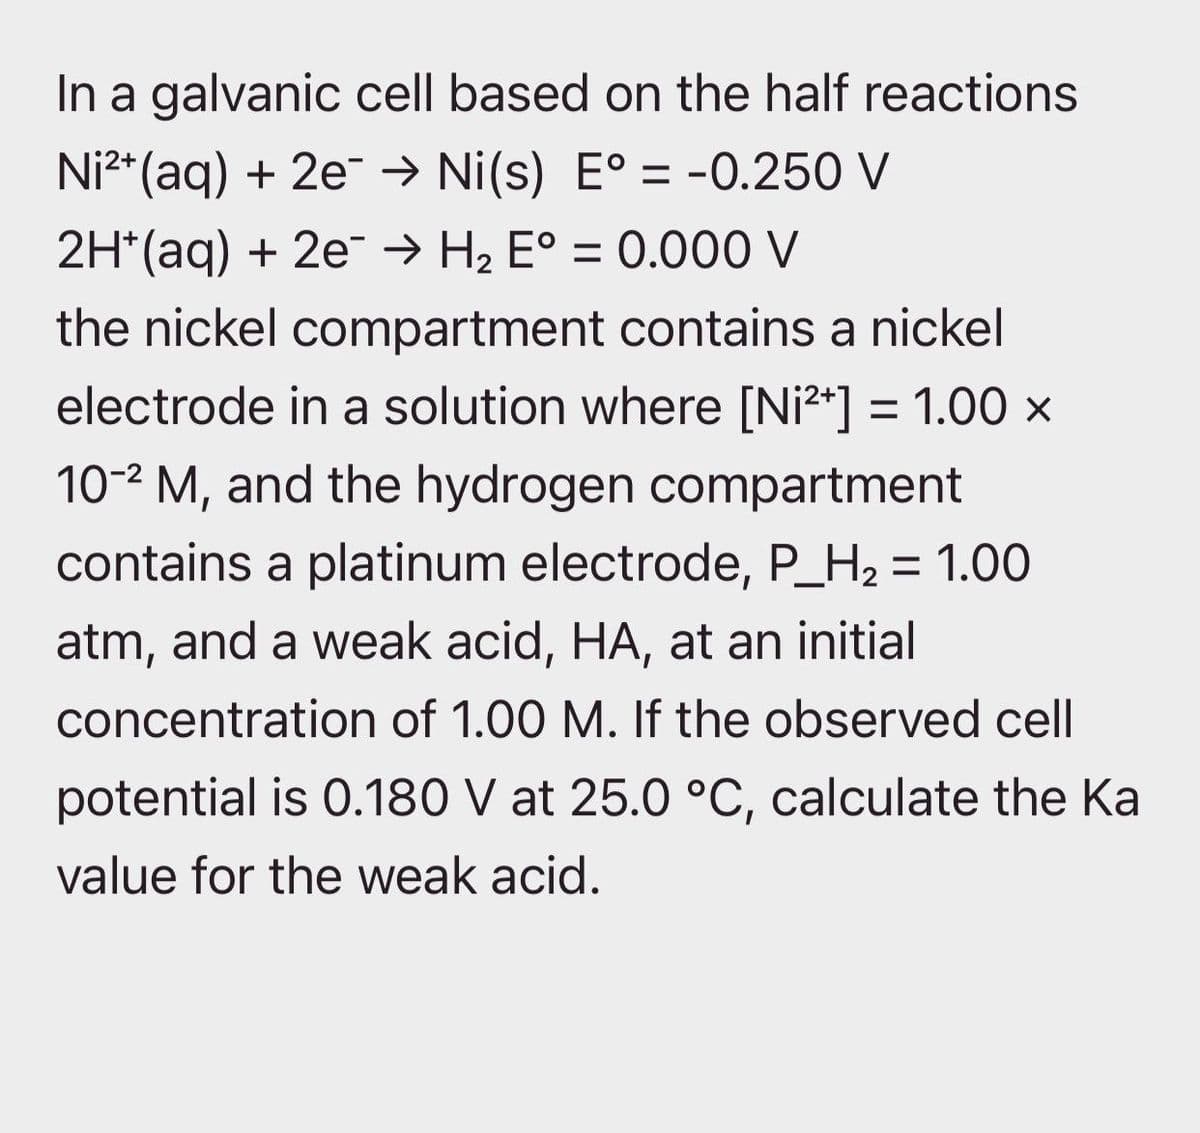 In a galvanic cell based on the half reactions
Ni²+ (aq) + 2e¯ → Ni(s) E° = -0.250 V
2H*(aq) + 2e → H₂ E° = 0.000 V
the nickel compartment contains a nickel
electrode in a solution where [Ni²+] = 1.00 ×
102 M, and the hydrogen compartment
contains a platinum electrode, P_H2 = 1.00
atm, and a weak acid, HA, at an initial
concentration of 1.00 M. If the observed cell
potential is 0.180 V at 25.0 °C, calculate the Ka
value for the weak acid.